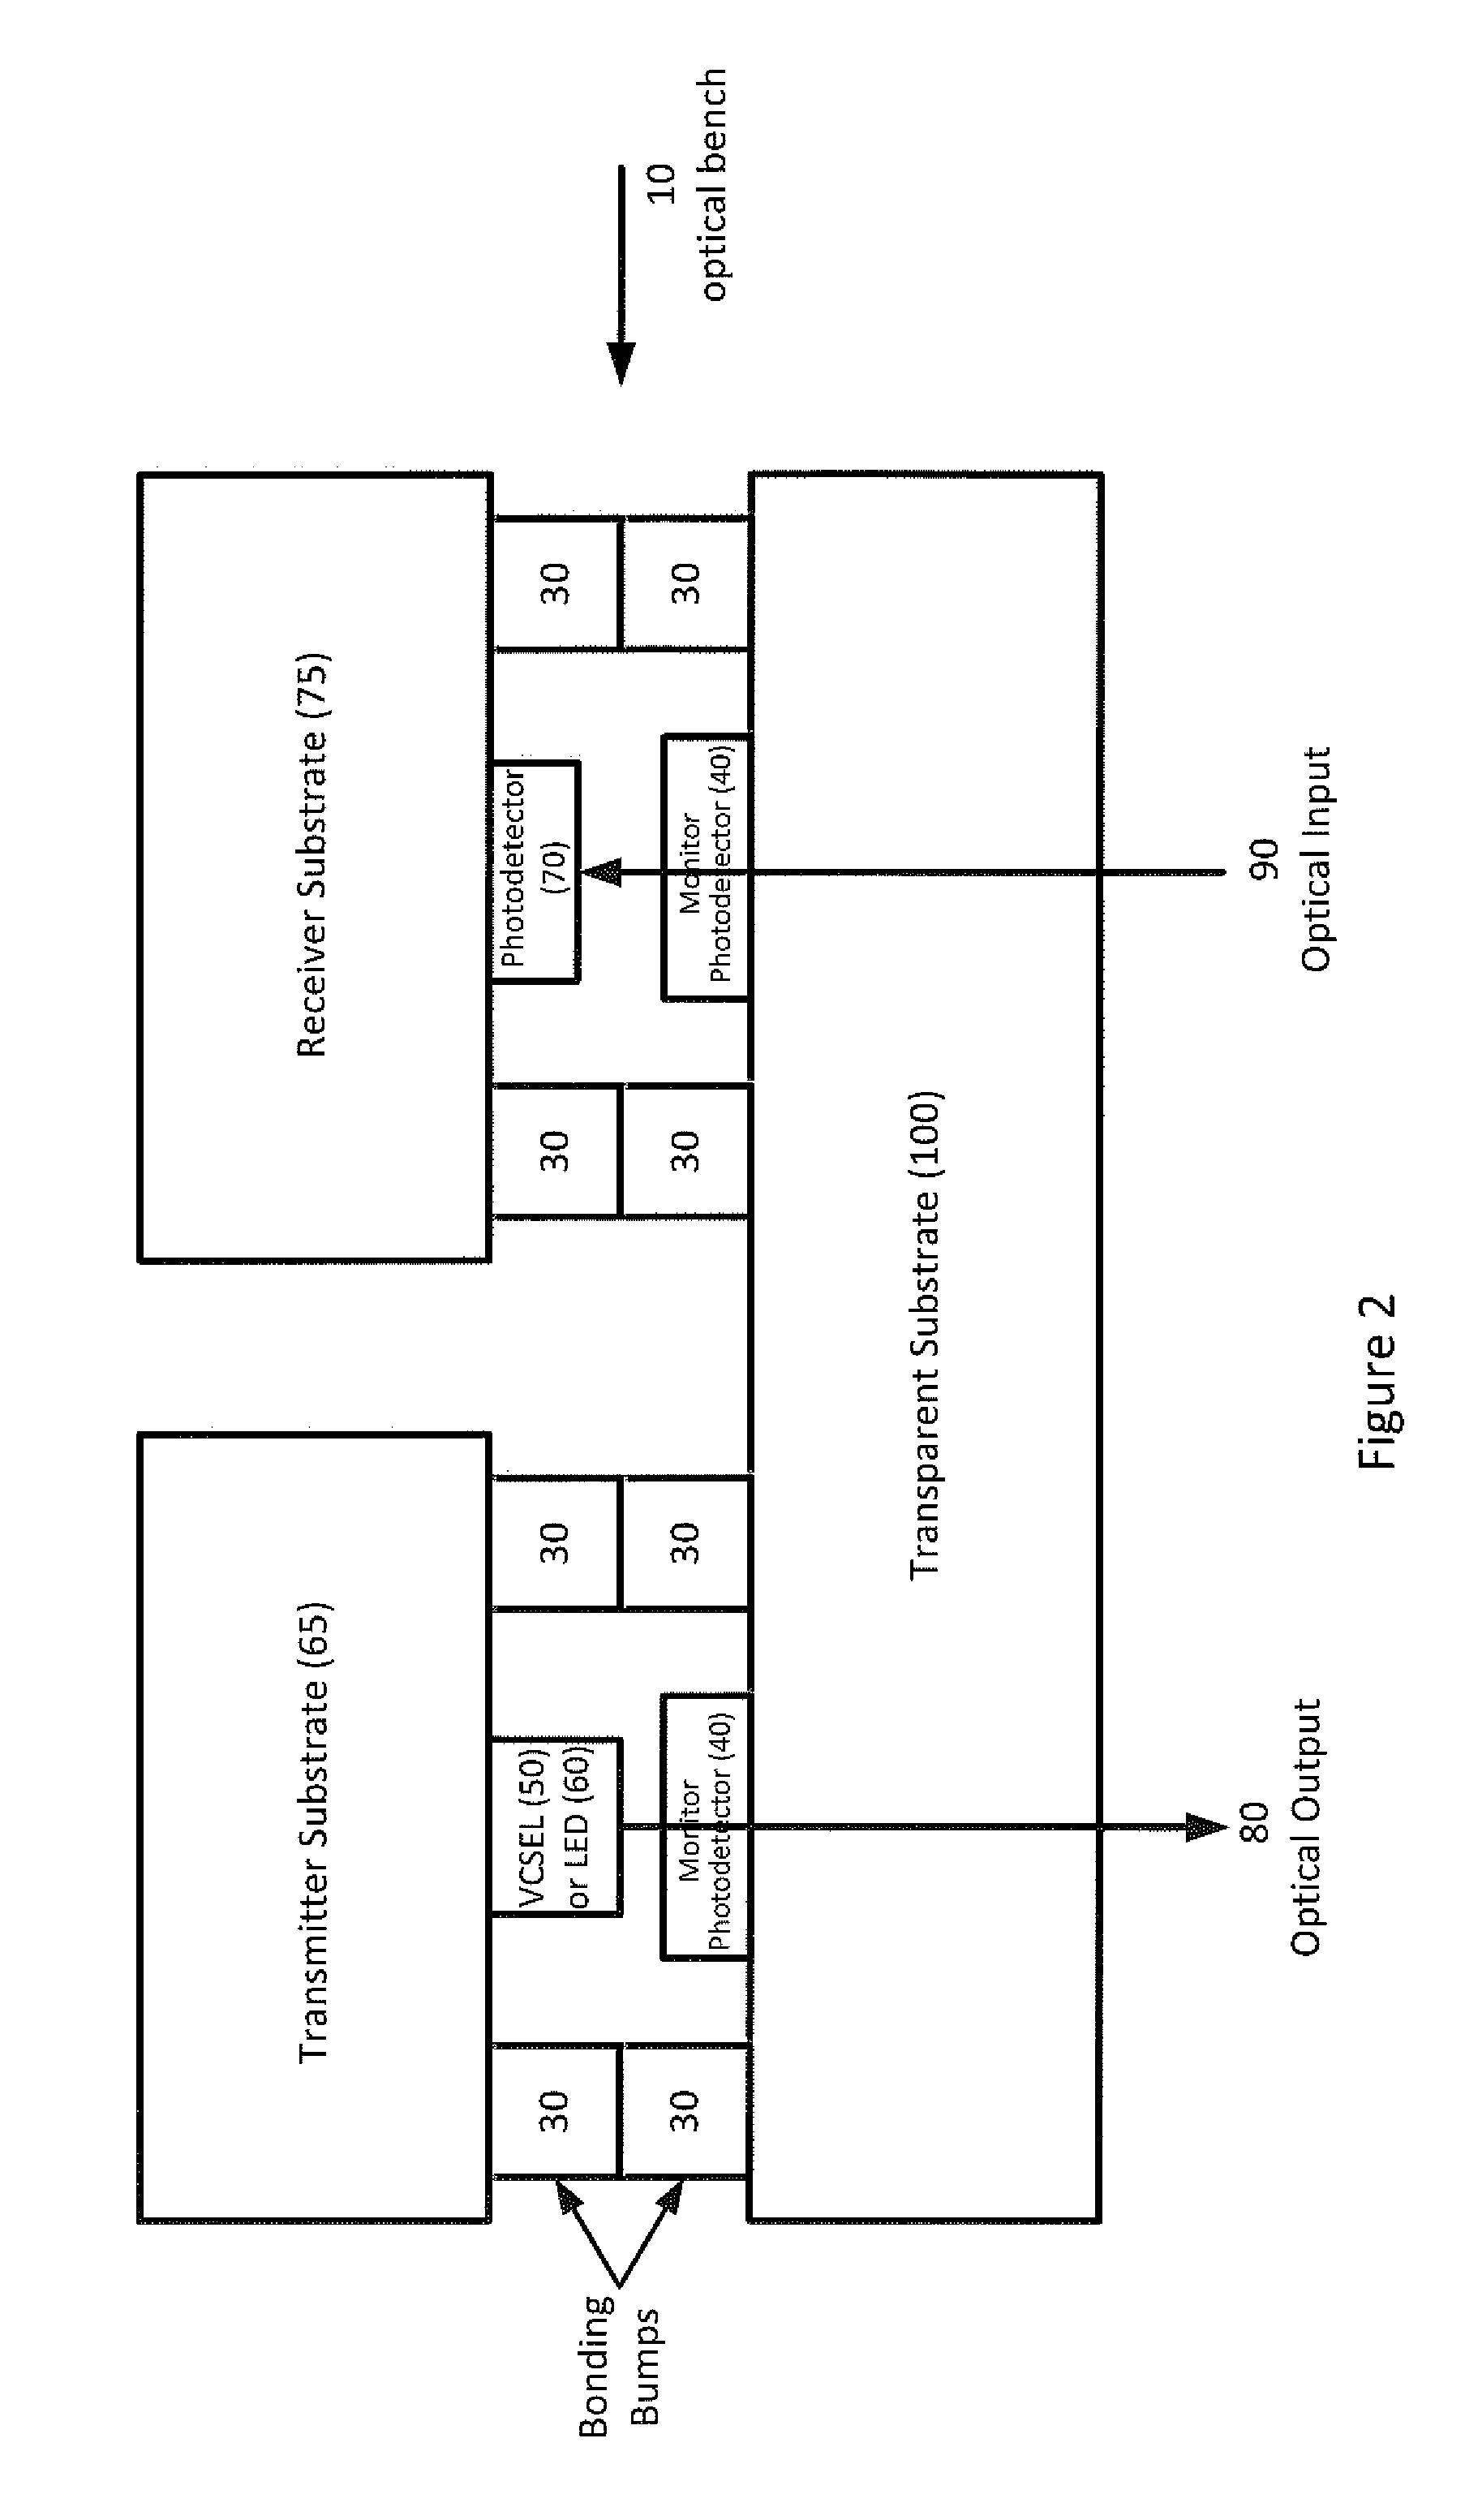 Optical bench apparatus having integrated monitor photodetectors and method for monitoring optical power using same